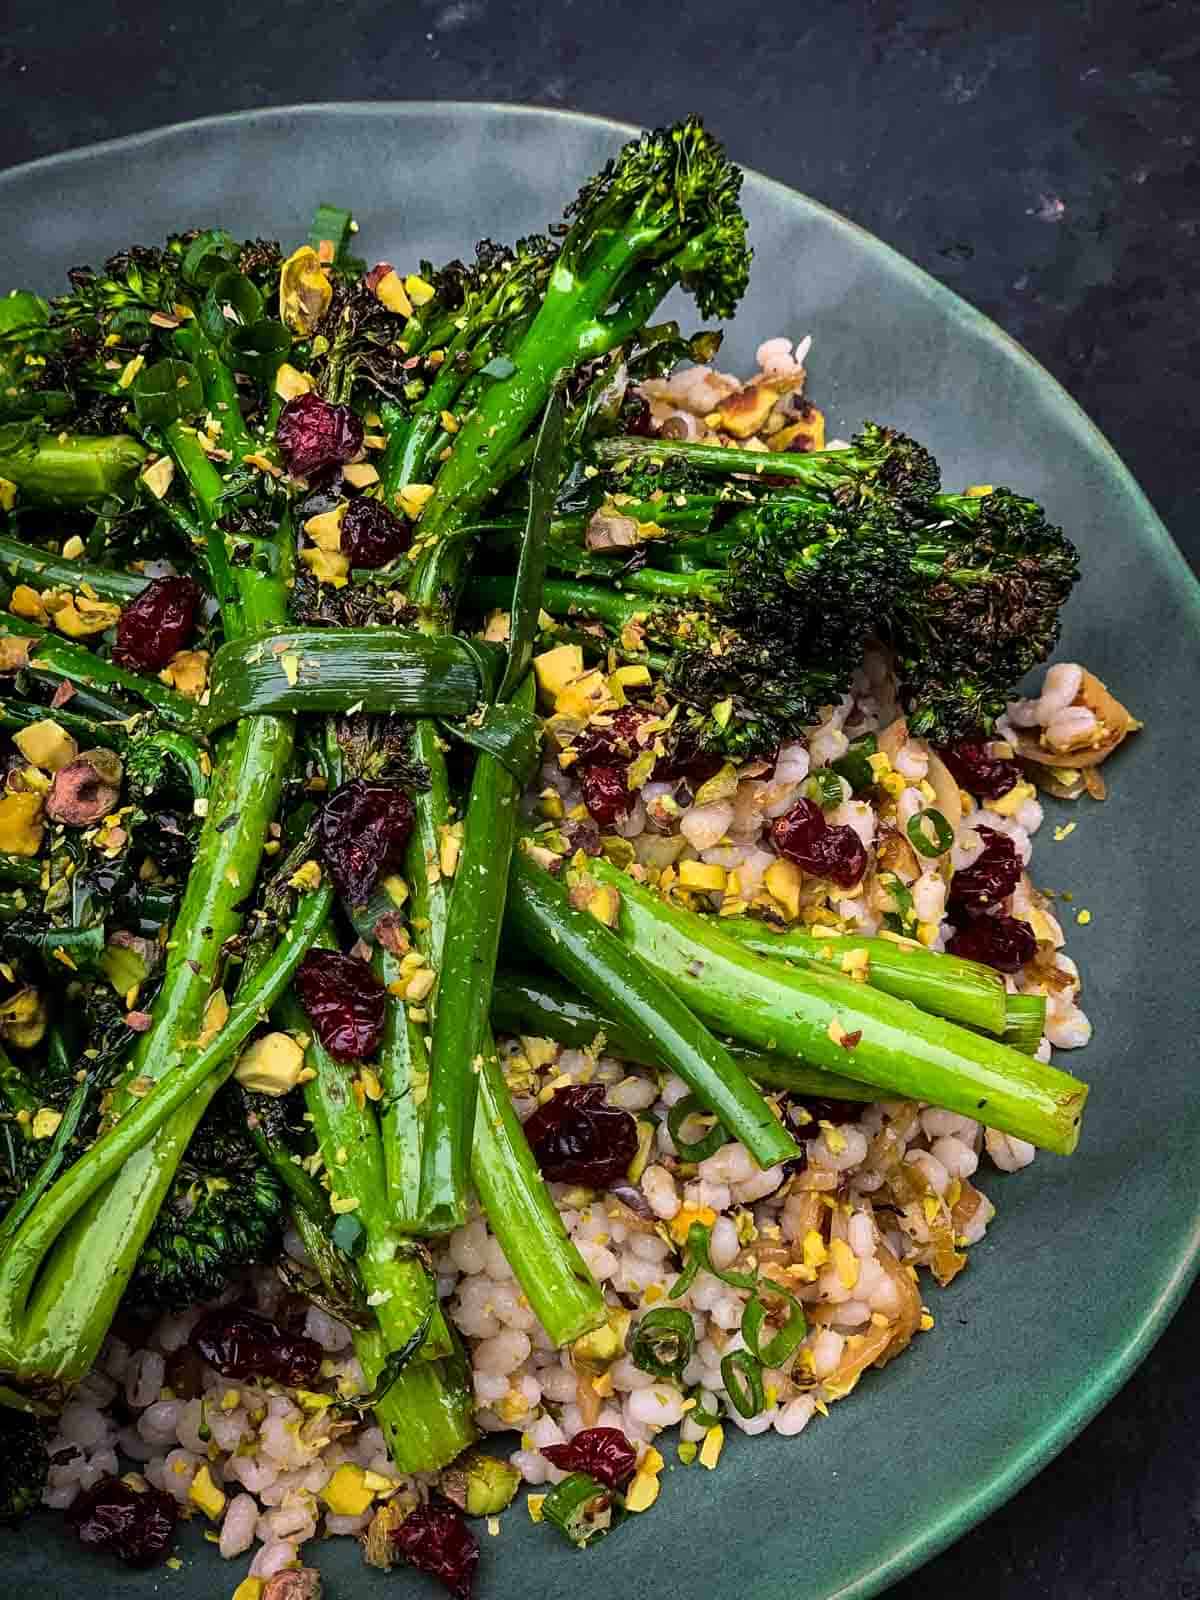 Grilled-Broccolini-Salad-Barley on a green plate